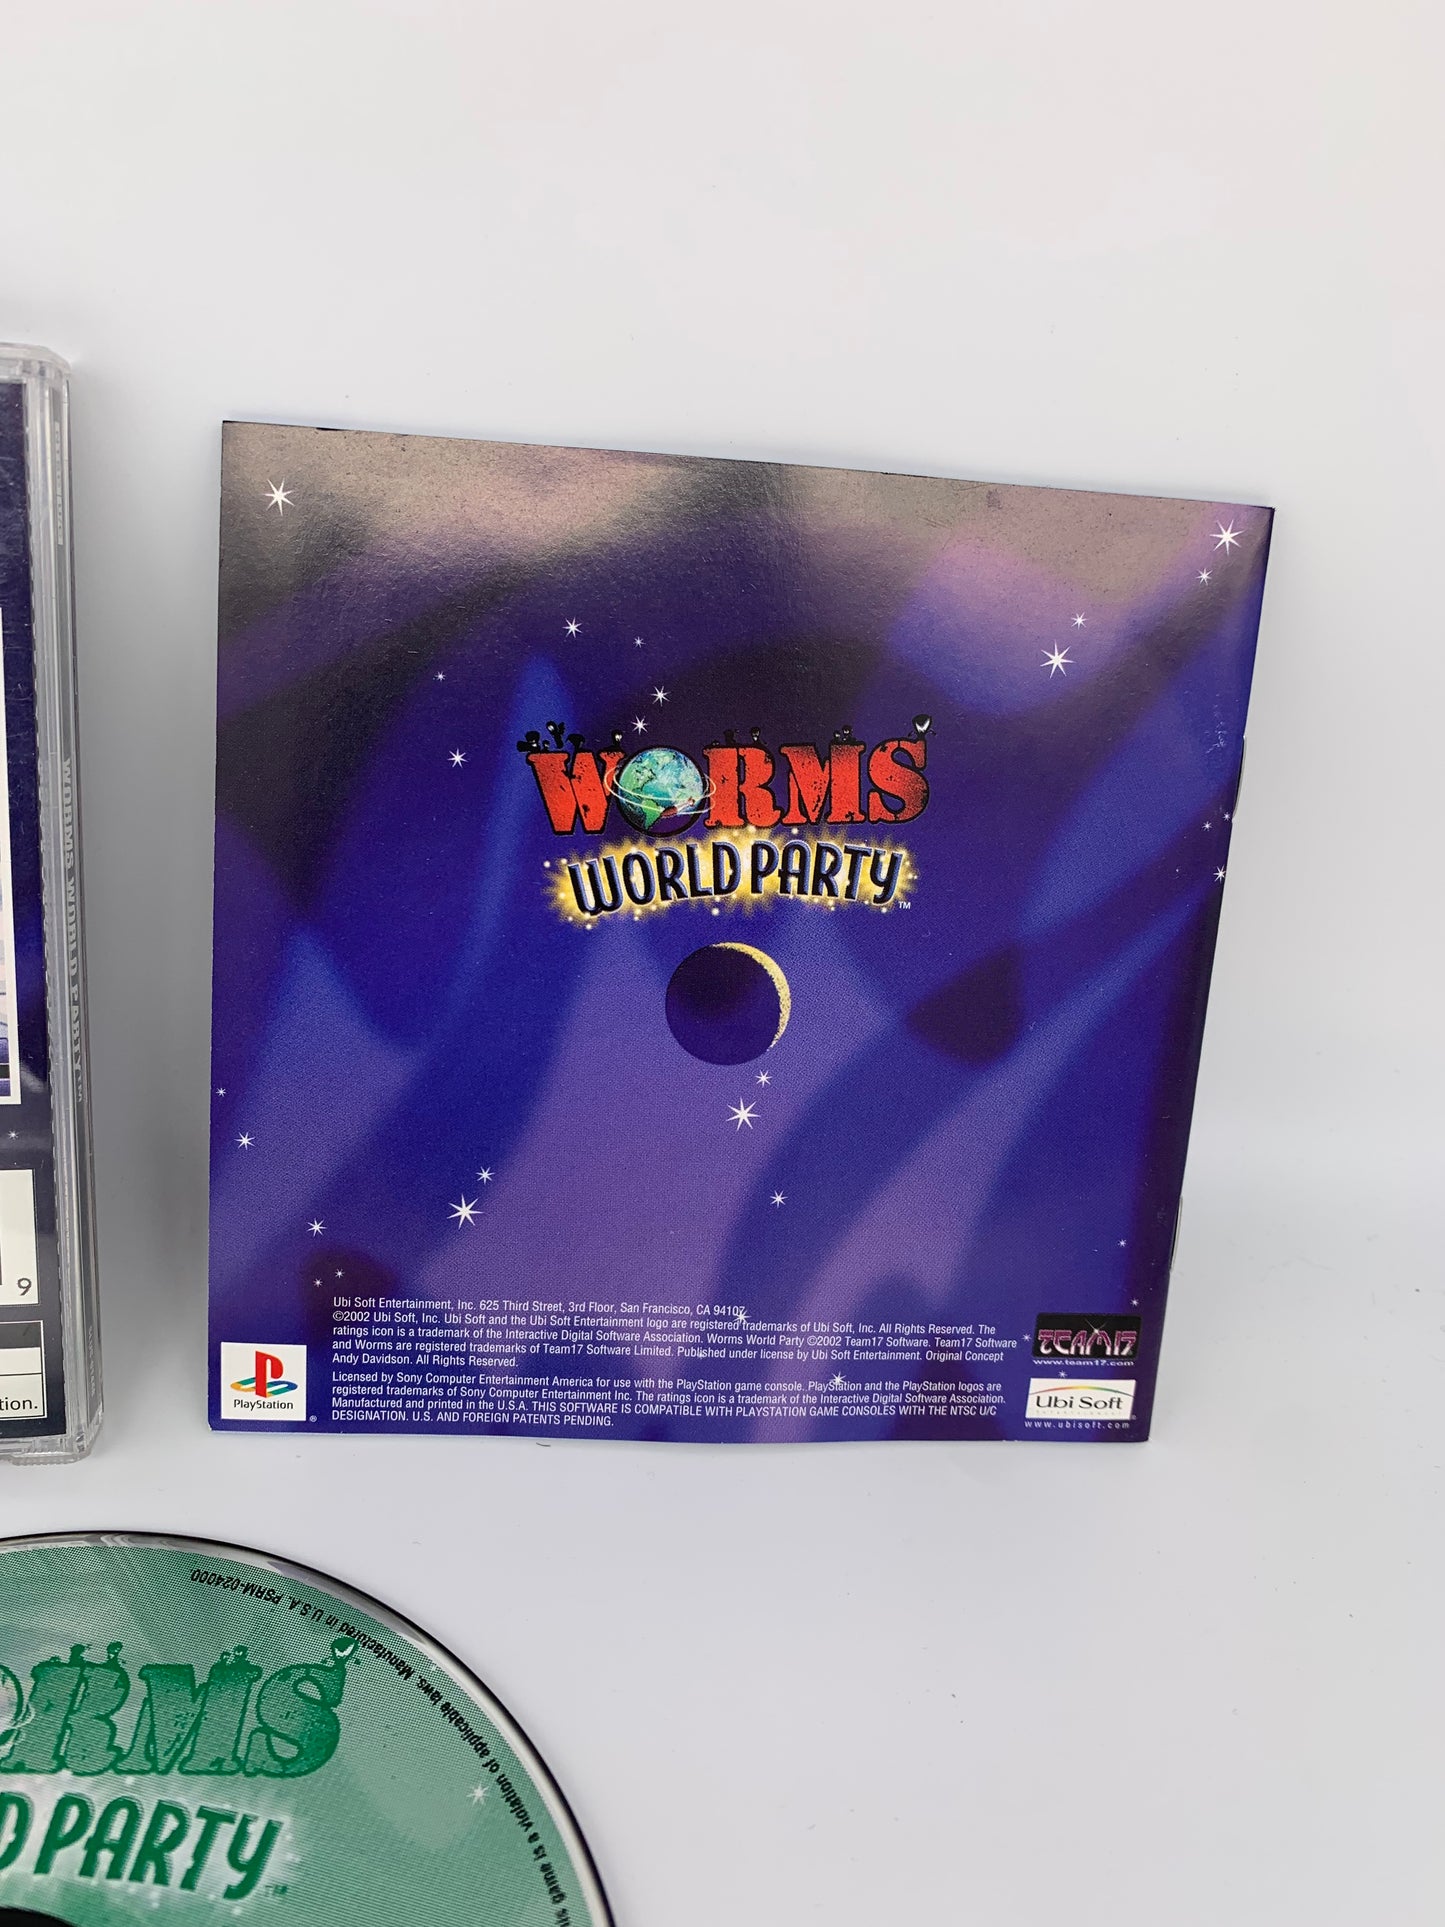 SONY PLAYSTATiON [PS1] | WORMS WORLD PARTY